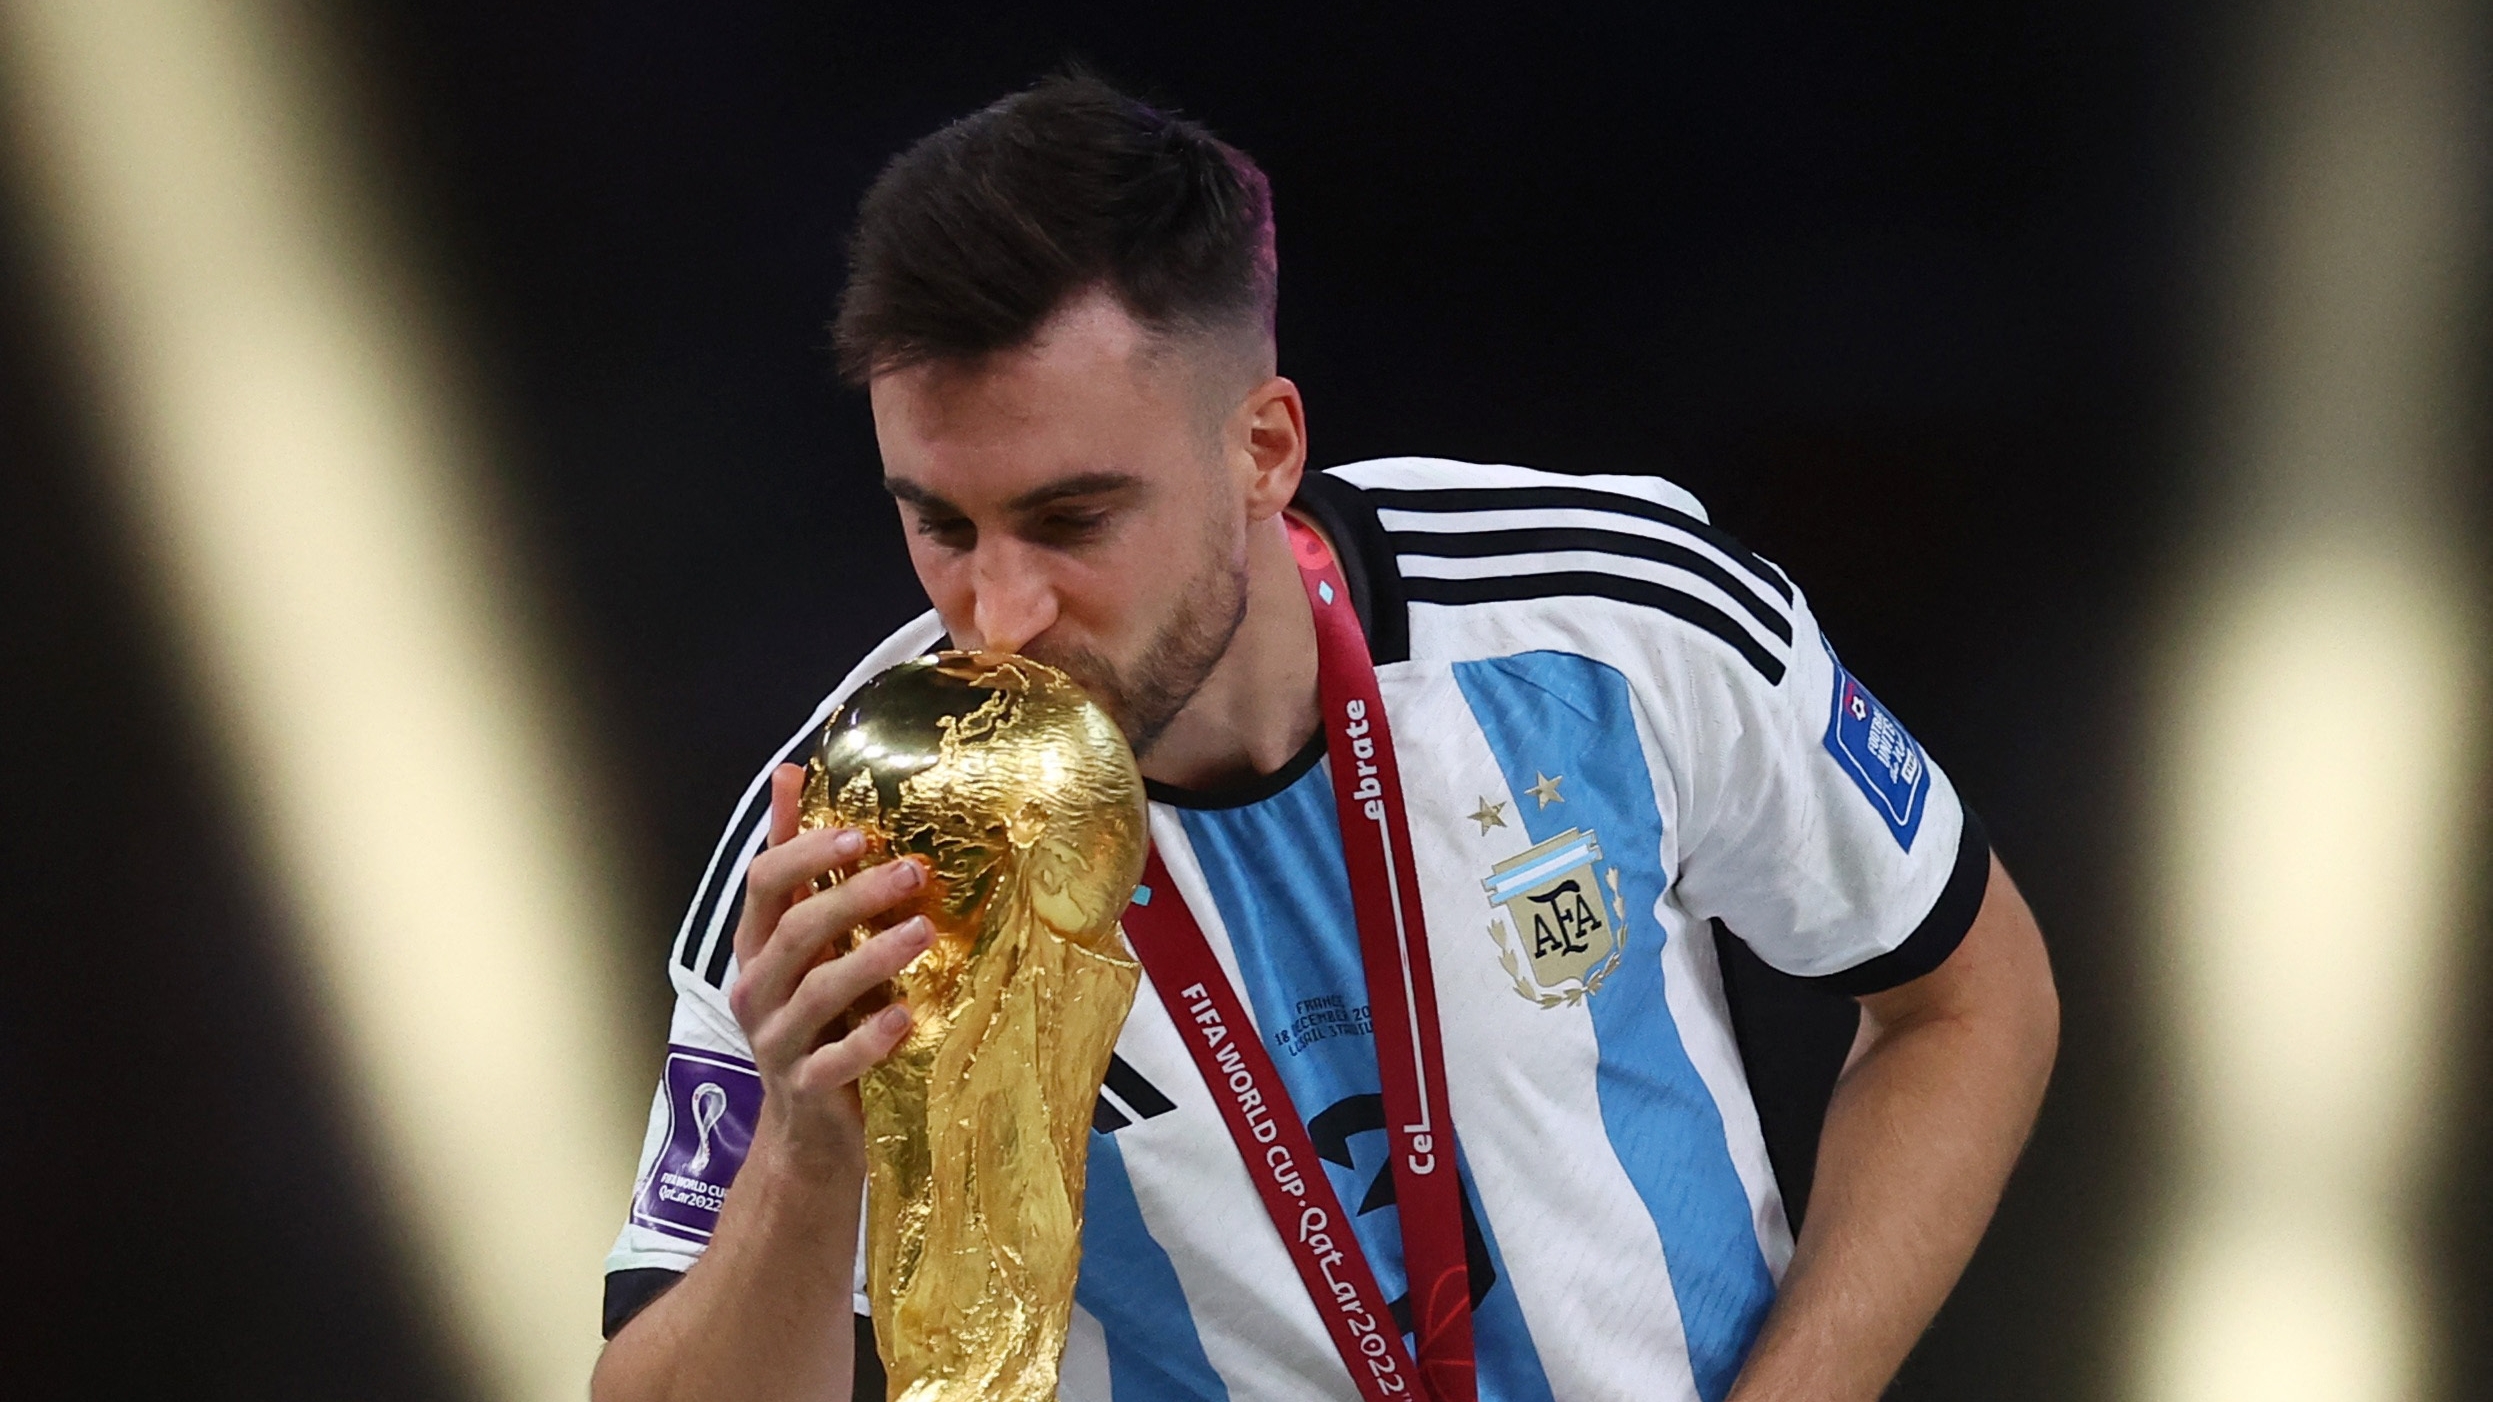 Soccer Football - FIFA World Cup Qatar 2022 - Final - Argentina v France - Lusail Stadium, Lusail, Qatar - December 18, 2022 Argentina's Nicolas Tagliafico kisses the World Cup trophy after receiving his medal as he celebrates winning the World Cup REUTERS/Kai Pfaffenbach